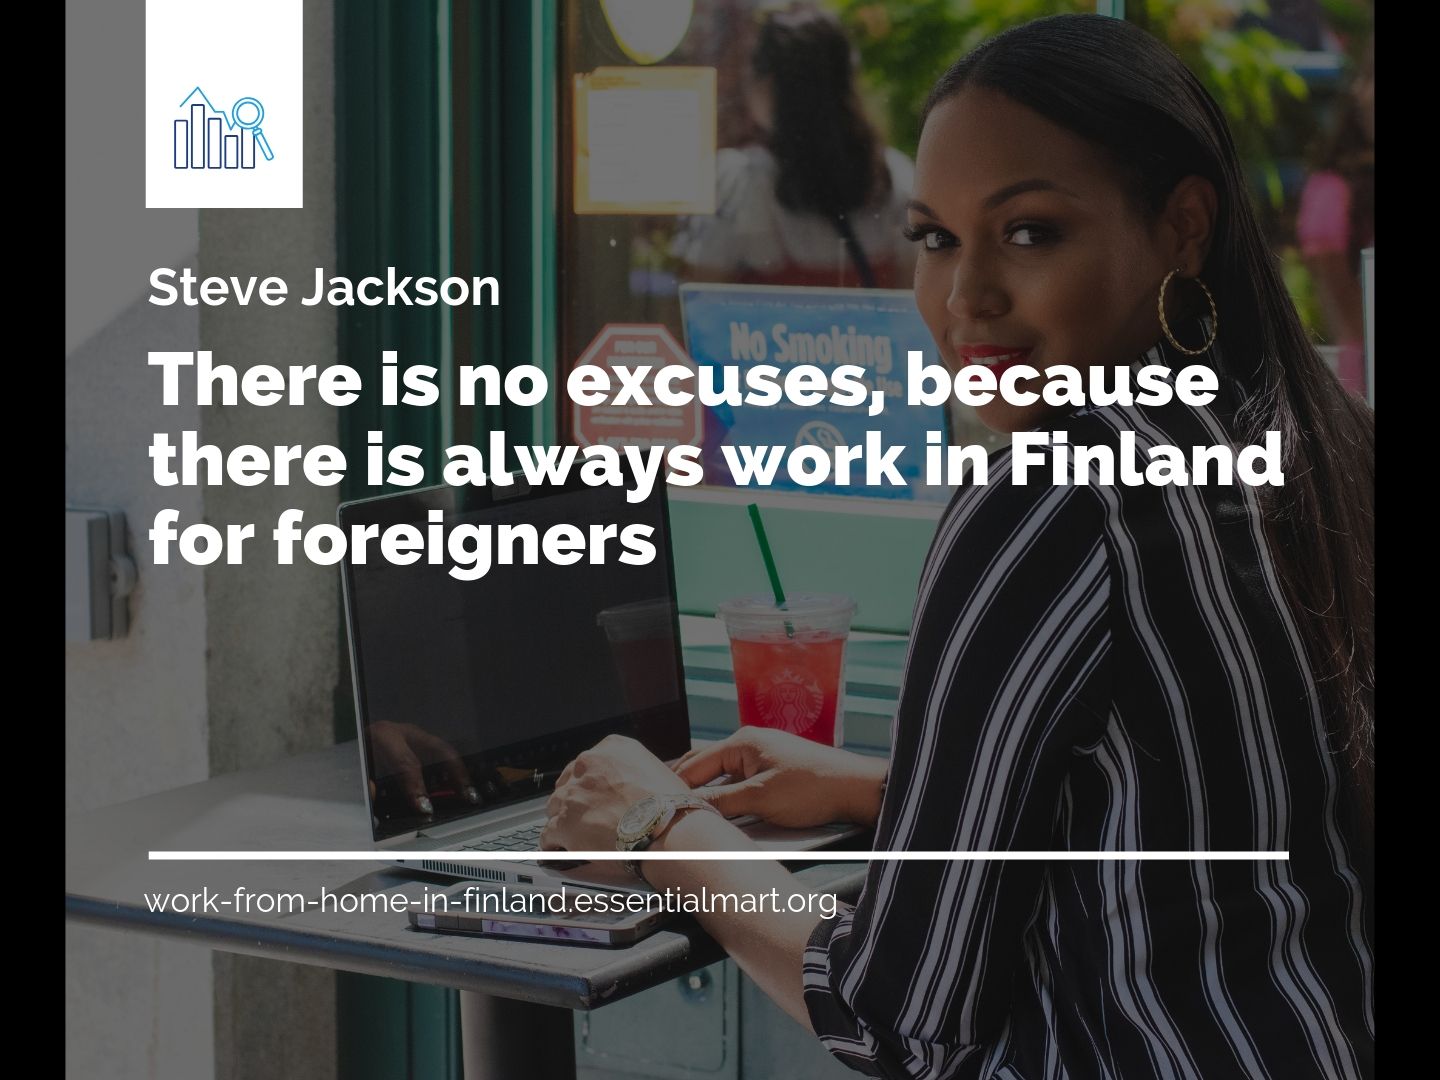 Work in Finland for foreigners